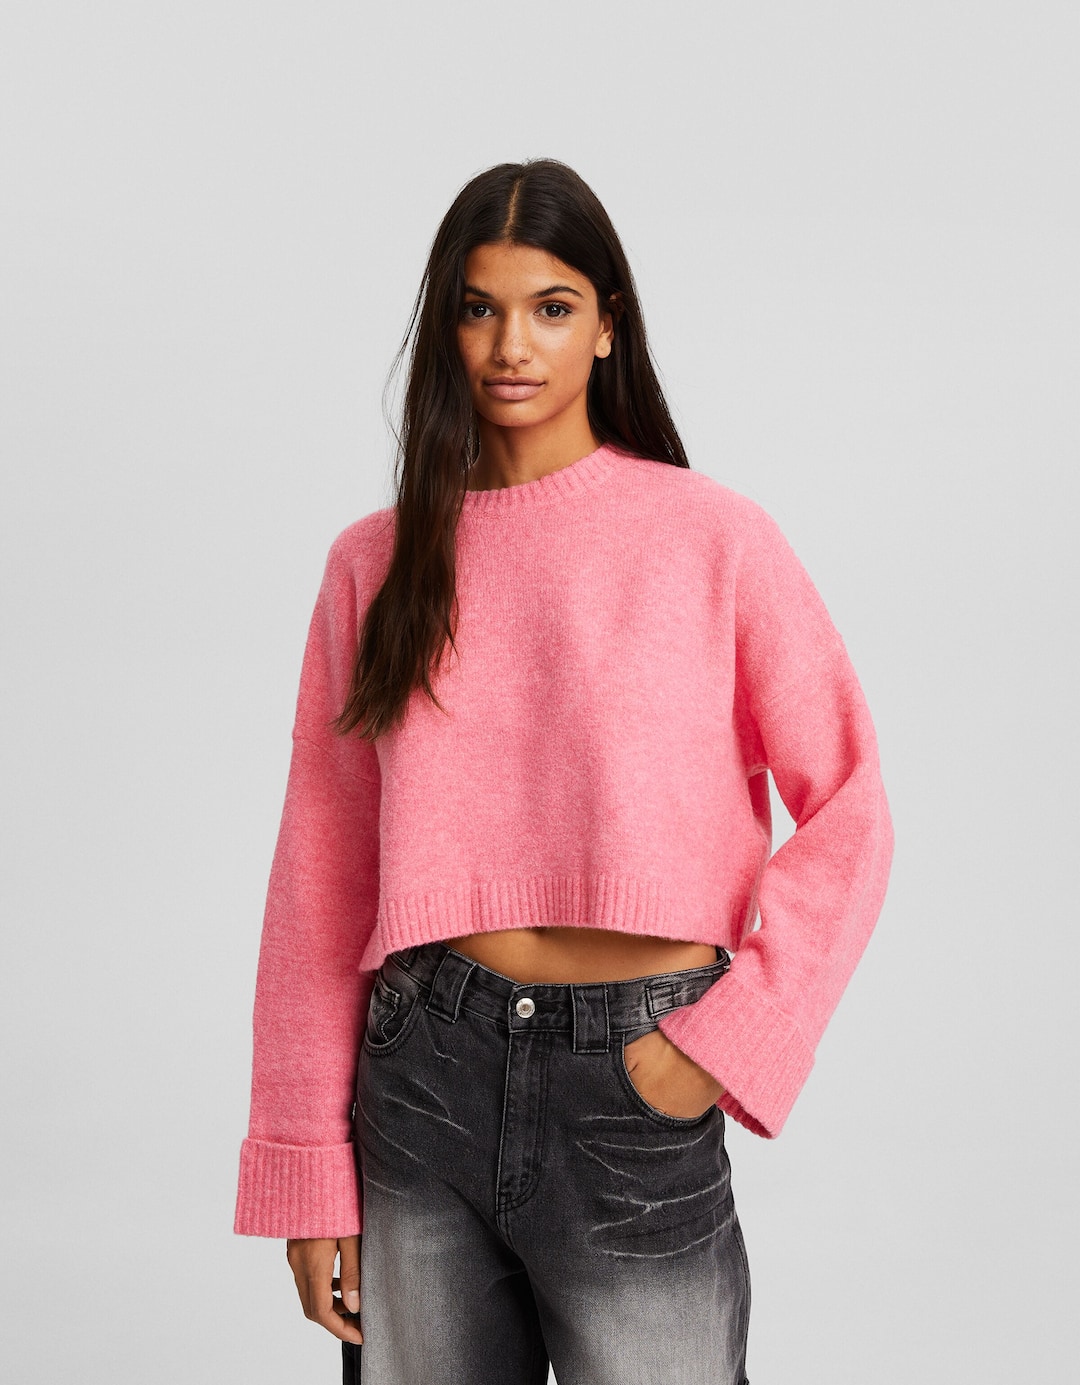 Round neck cropped sweater